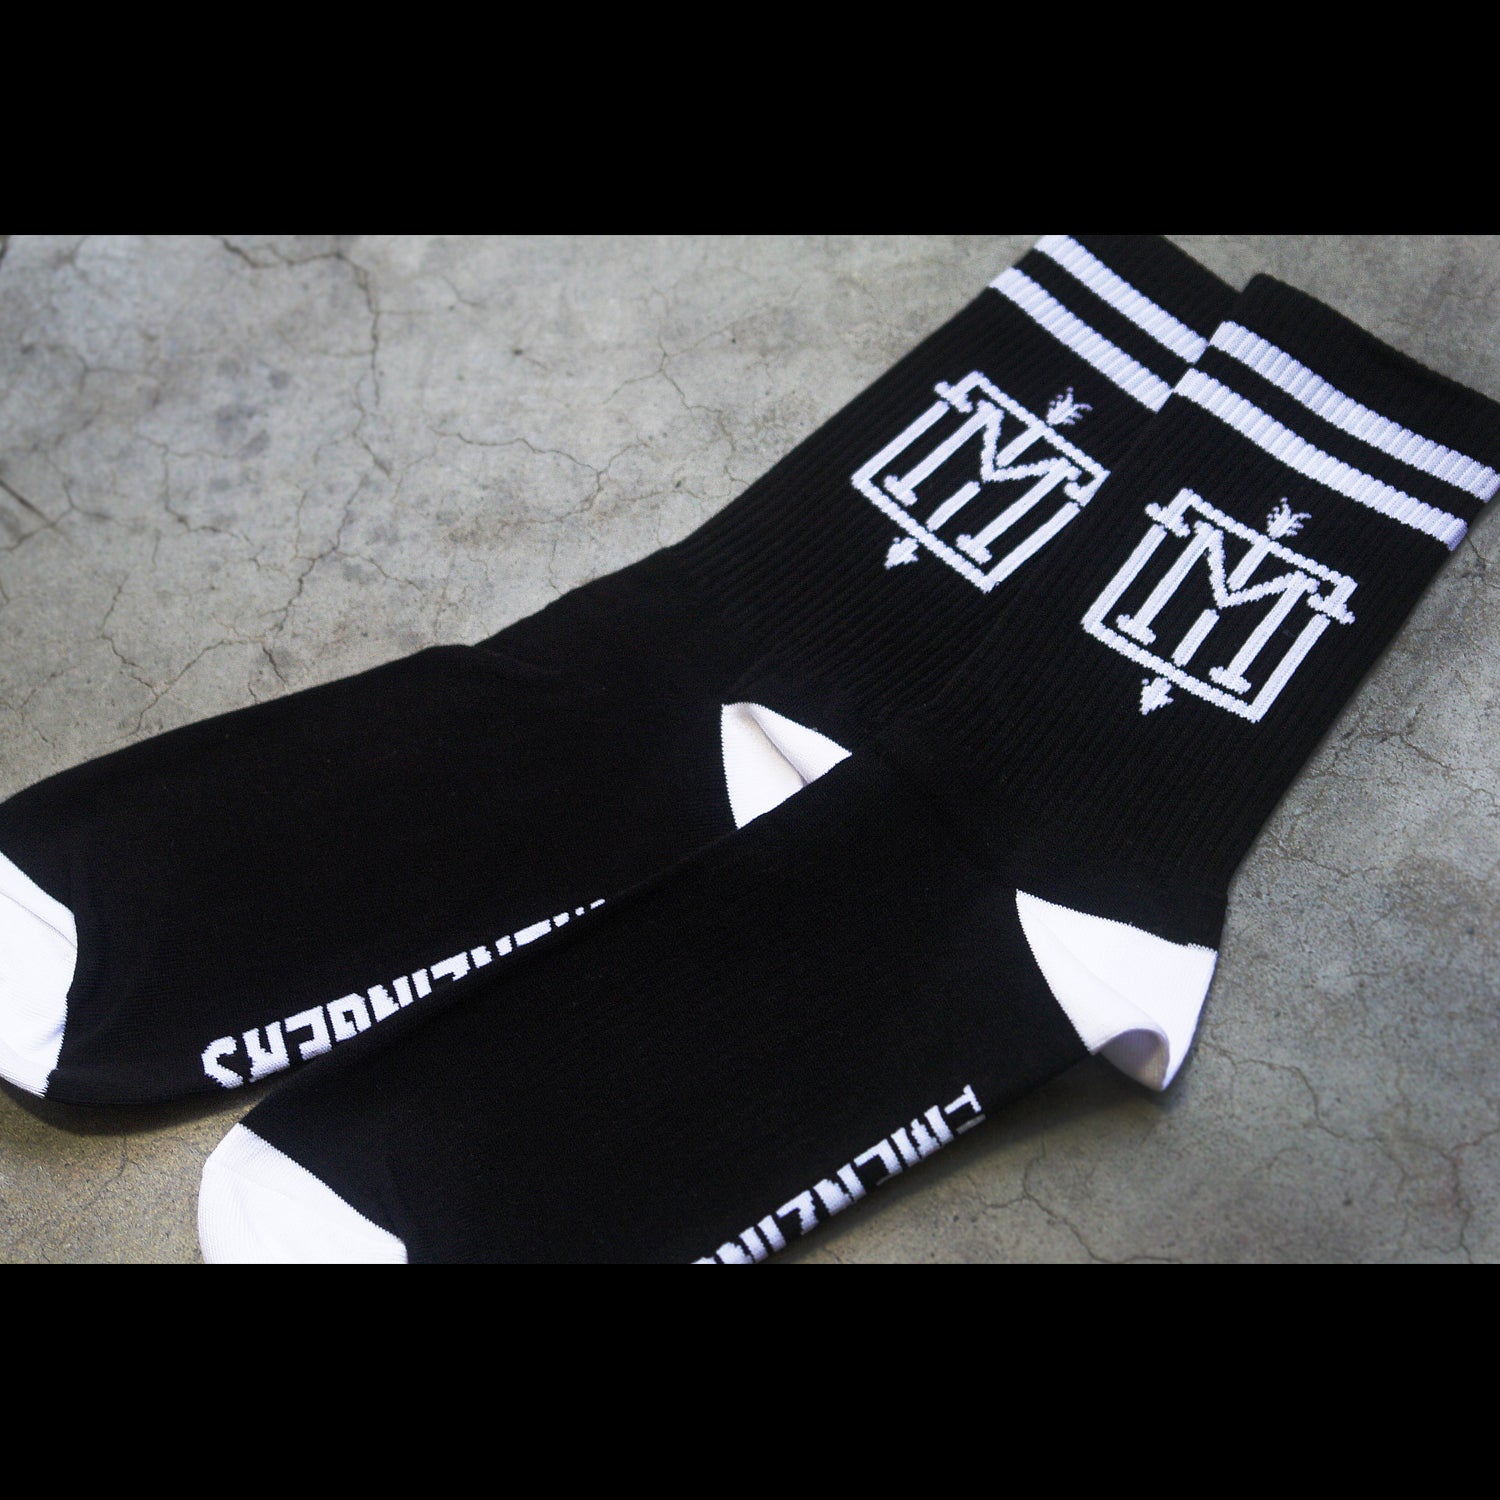 close up angled photo of two knit socks on cement background. image of two socks on white background. socks are black with two white stripes at the top and white toes and heals. there is a white emblem with the letter M and an arrow down the center on the part of the sock that is above the ankle and it says the menzingers in white on the side bottom of the socks.